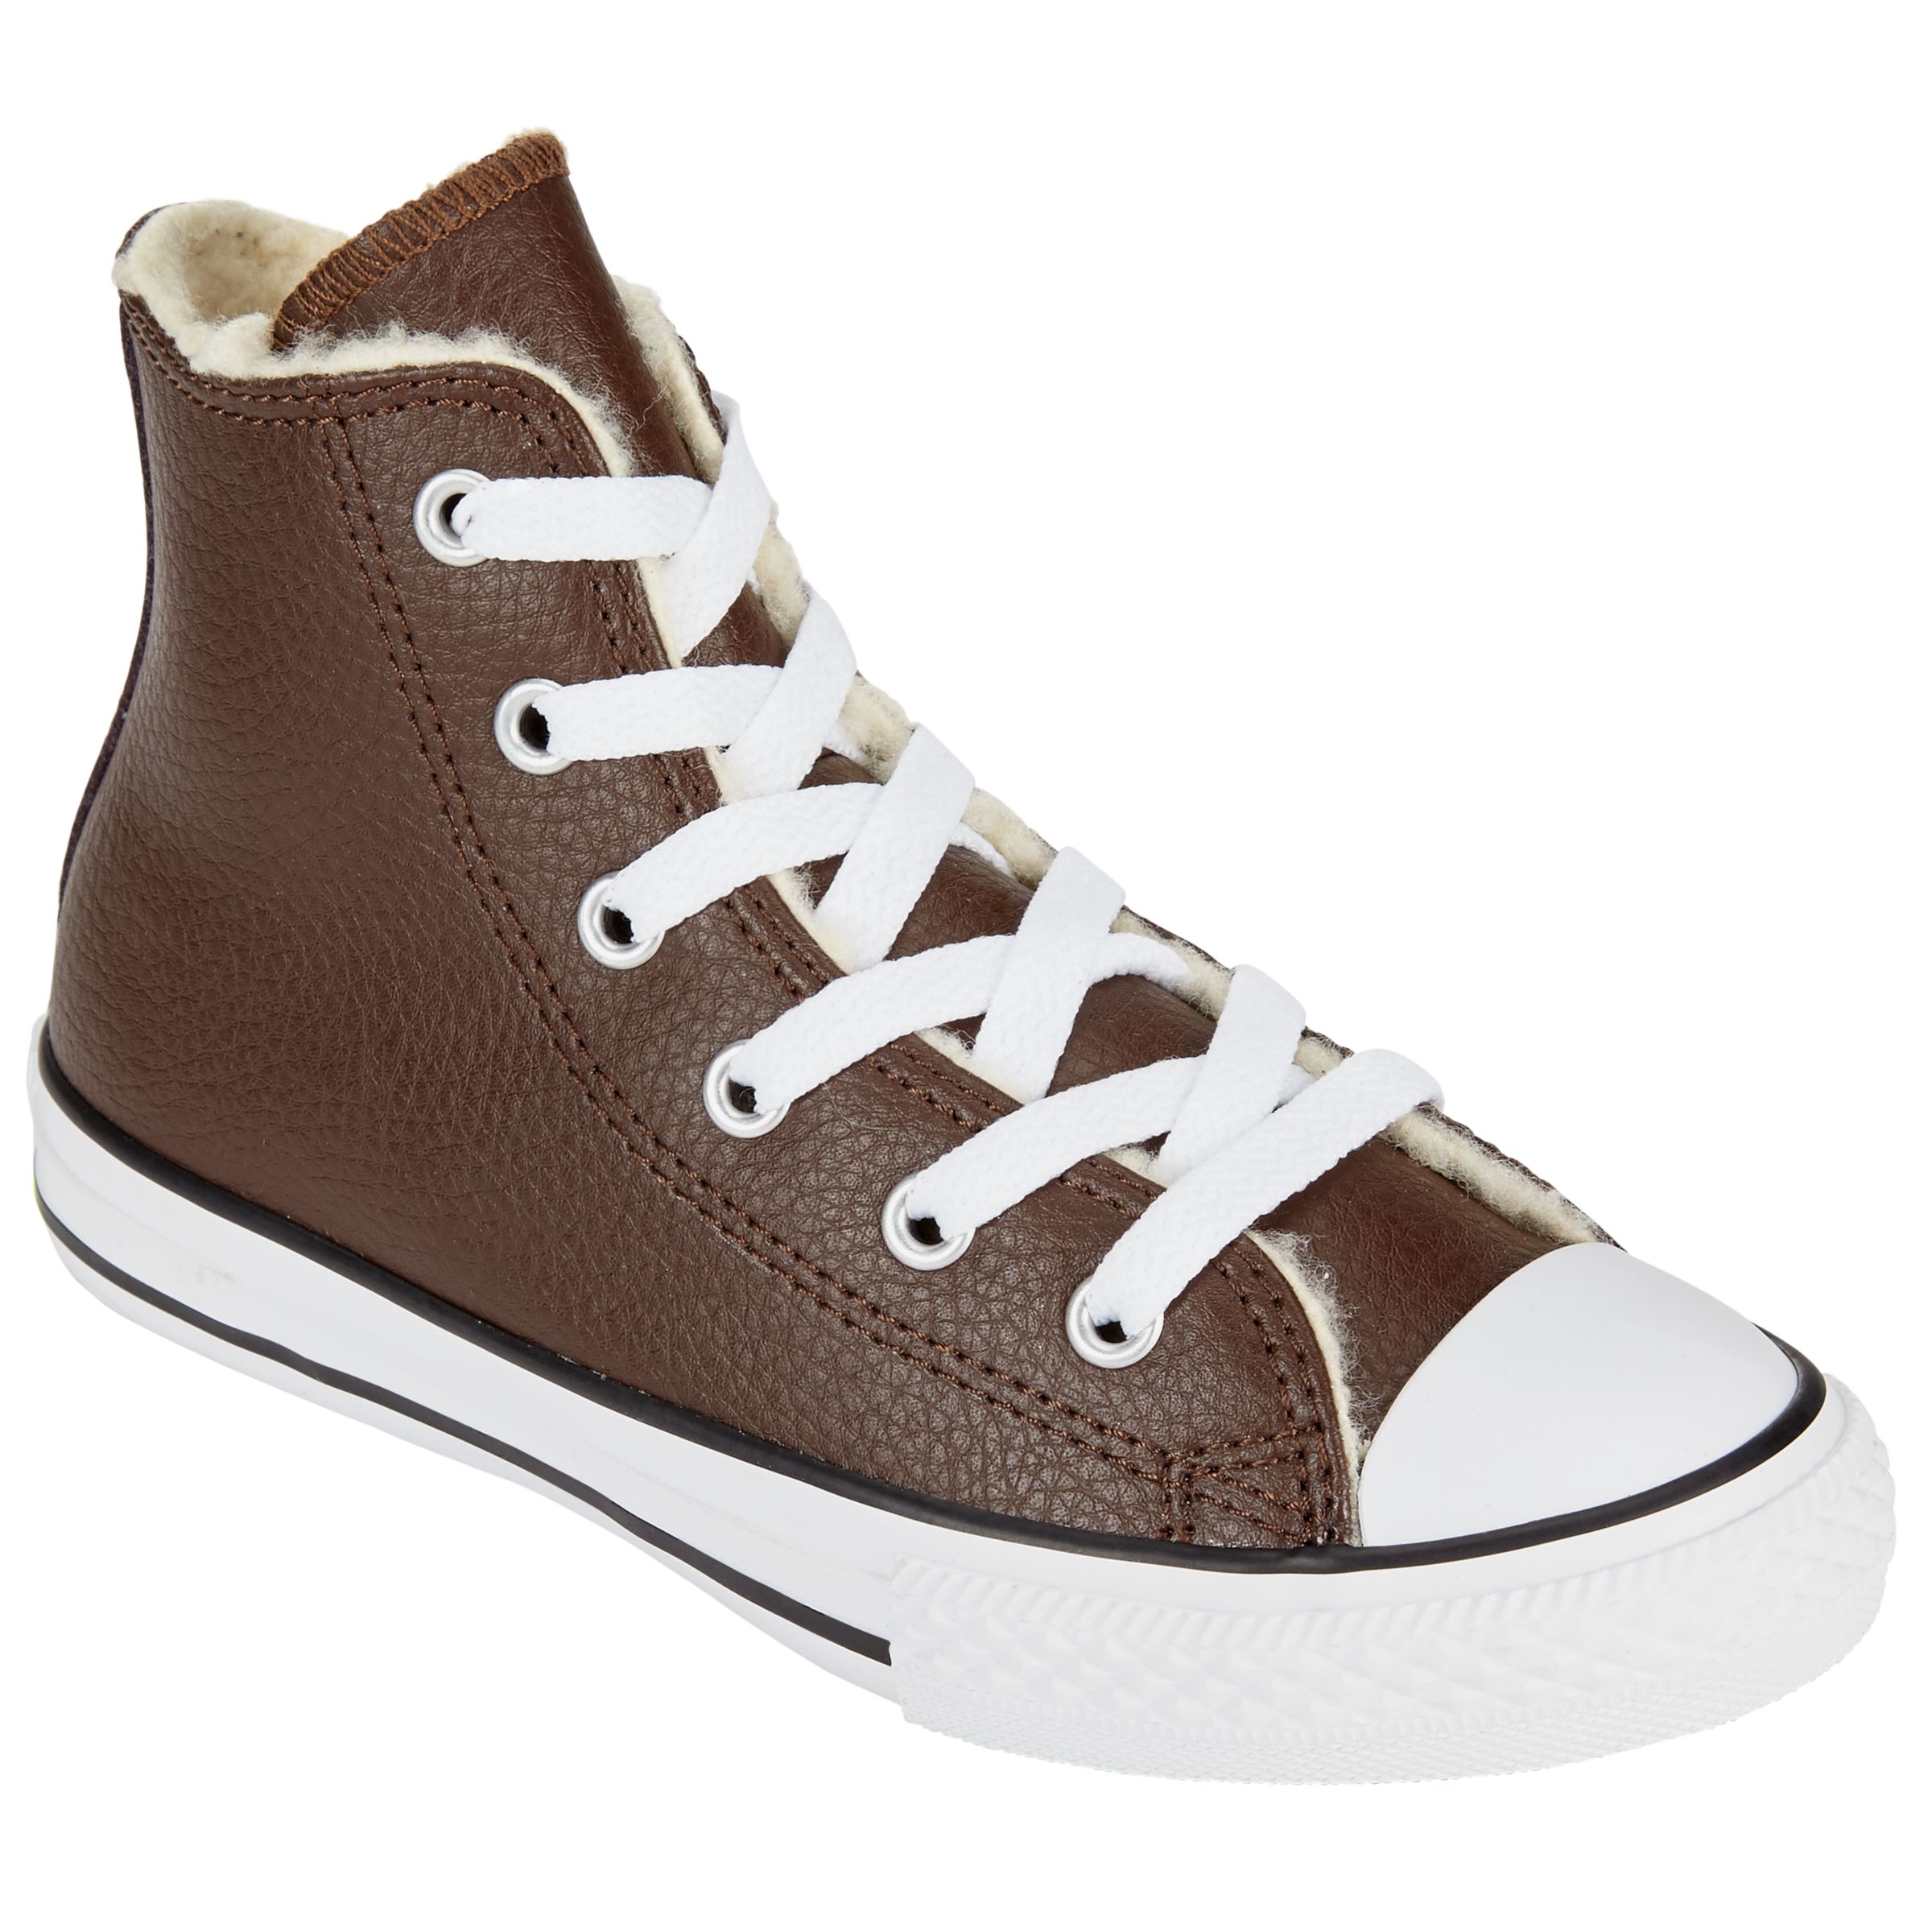 converse chuck taylor all star faux fur lined leather trainers